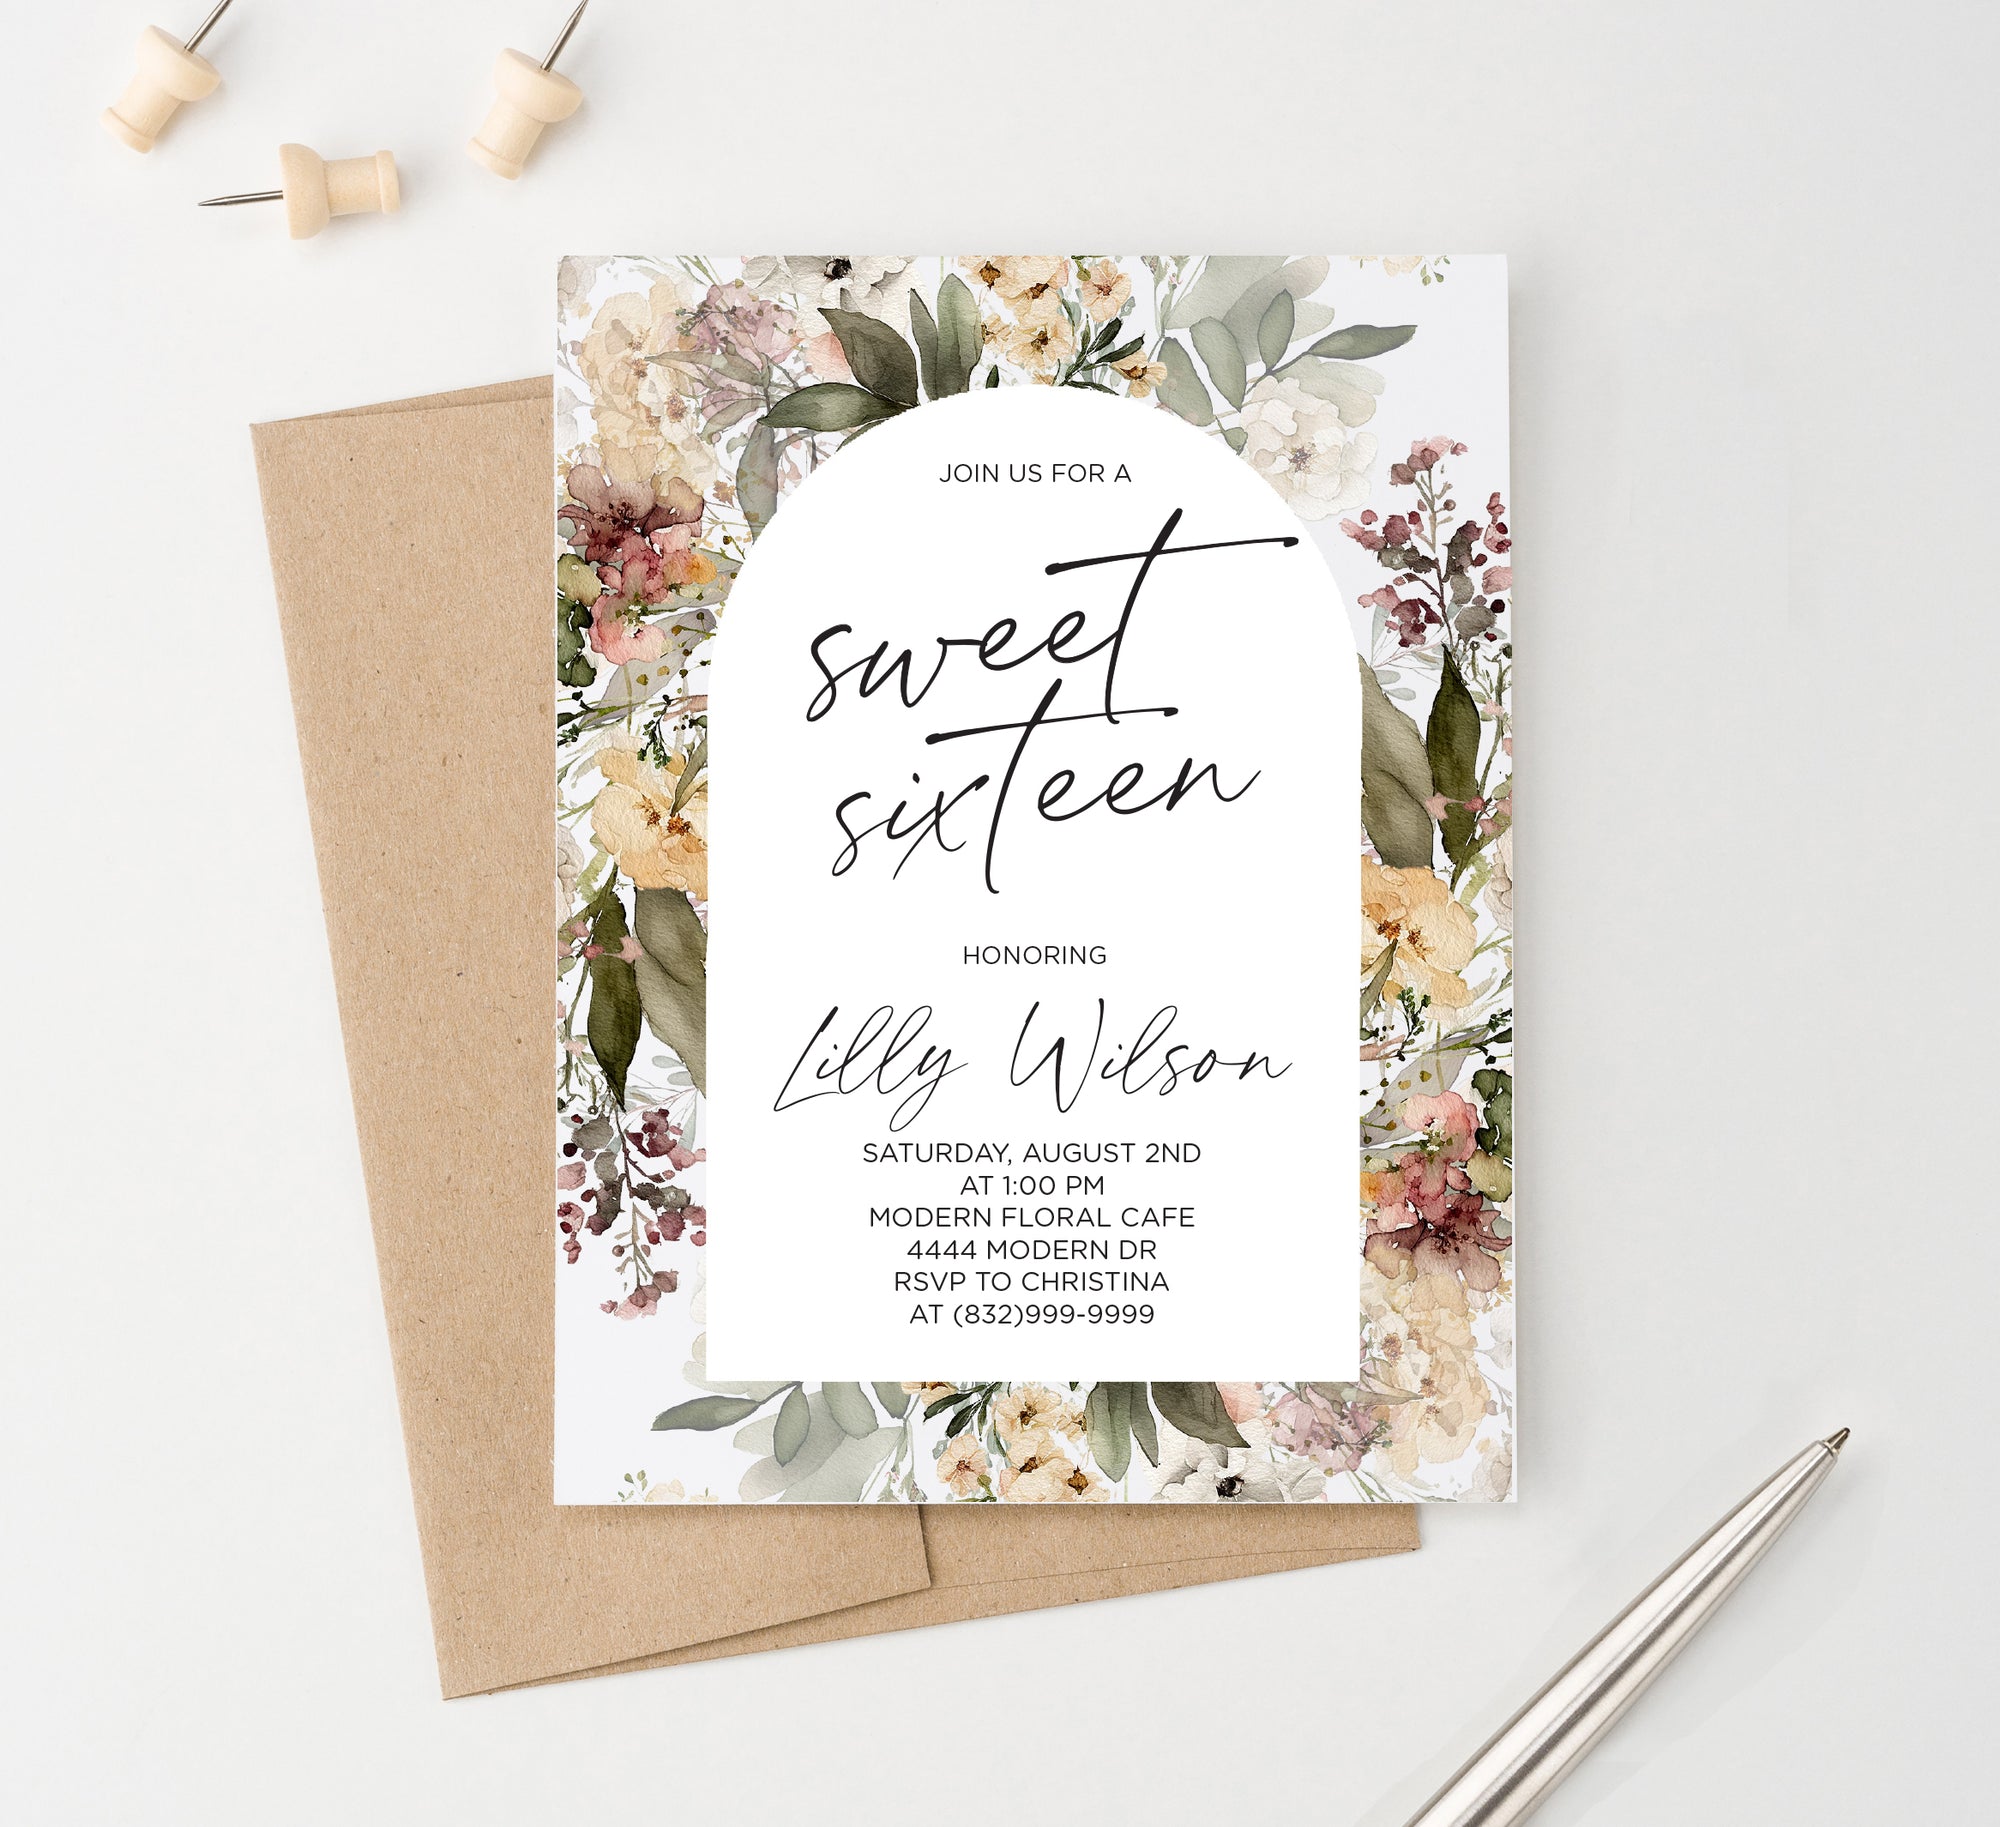 Elegant Sweet Sixteen Invitations With Floral Arch